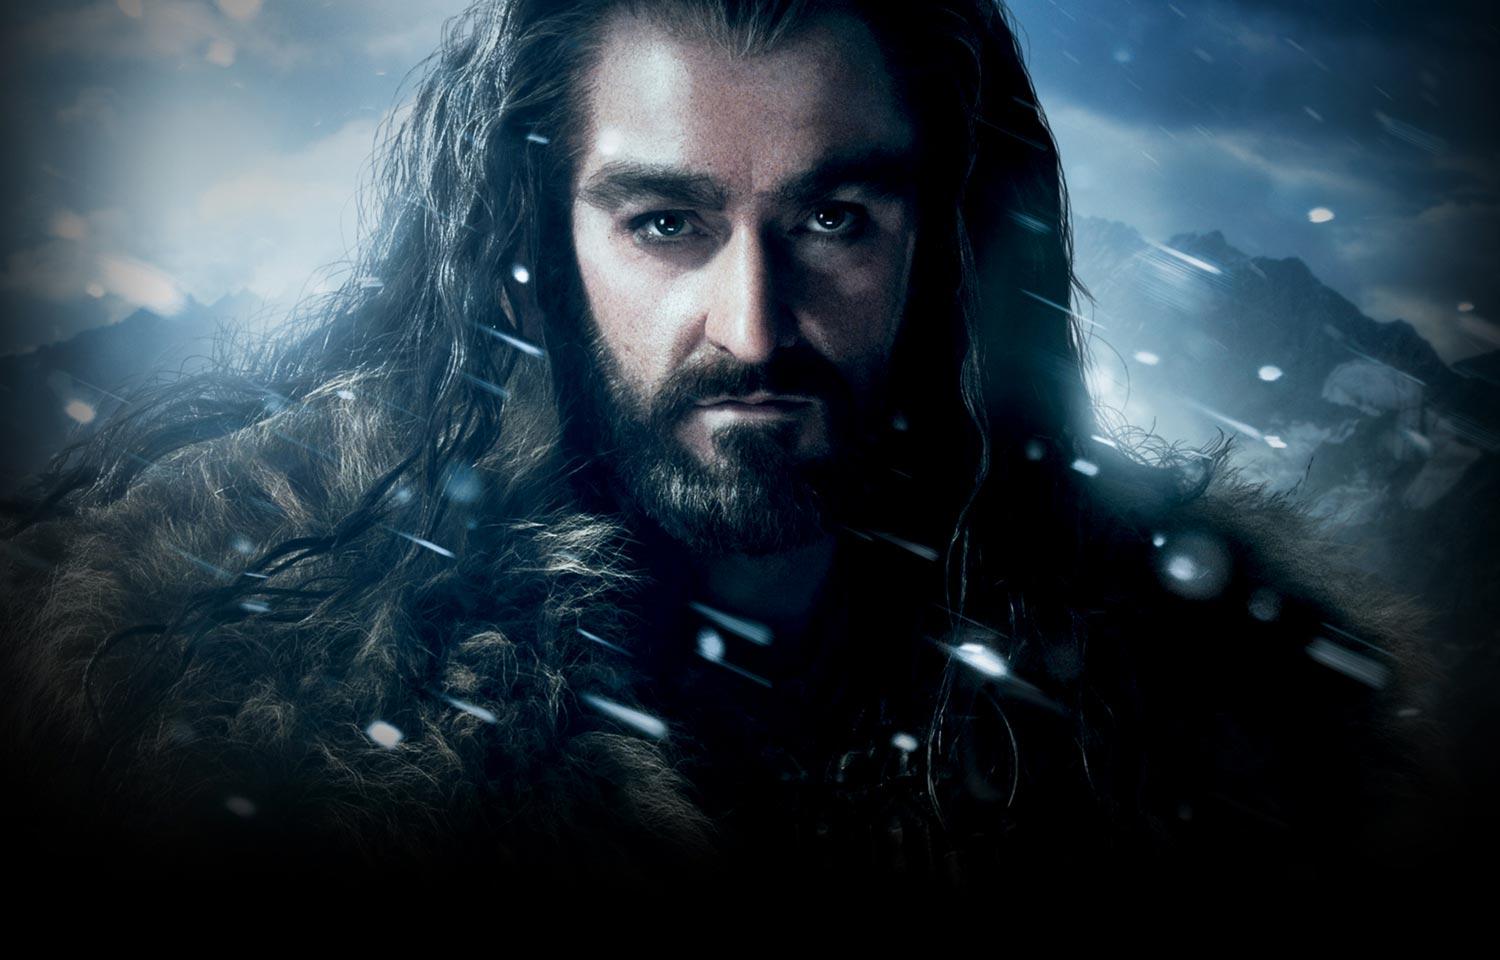 Thorin Oakenshield In The. The One Wiki To